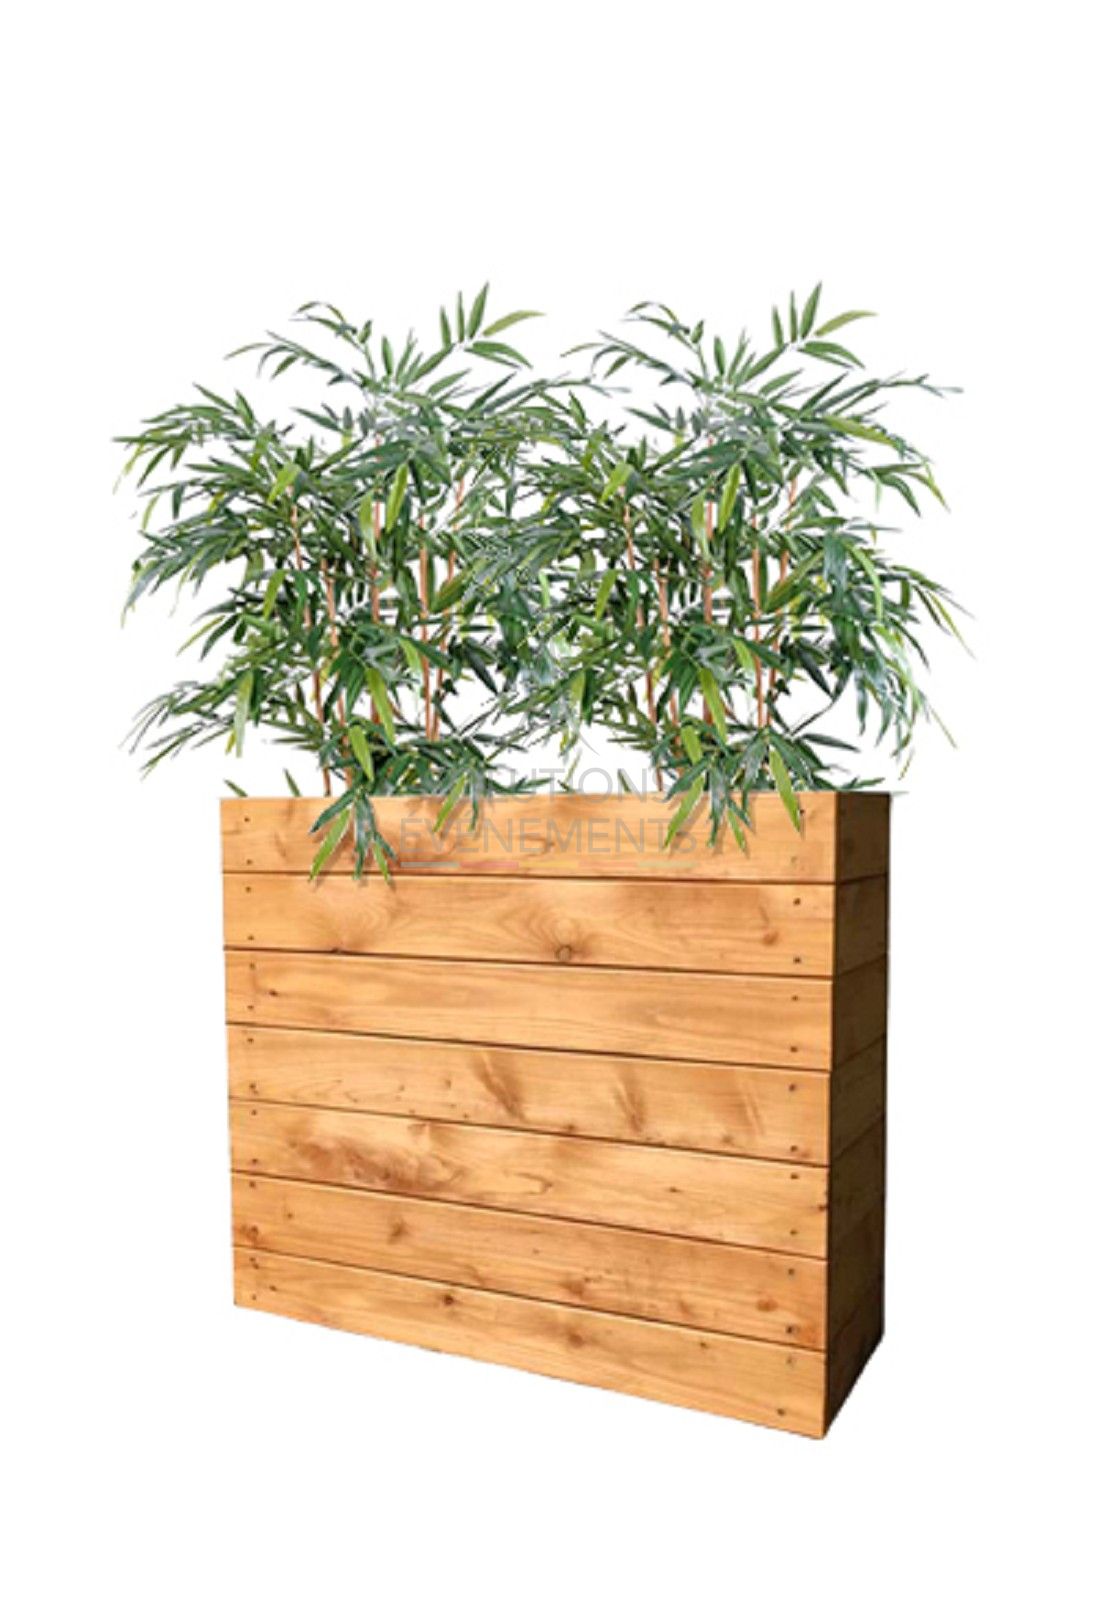 Rental of wooden and bamboo planters